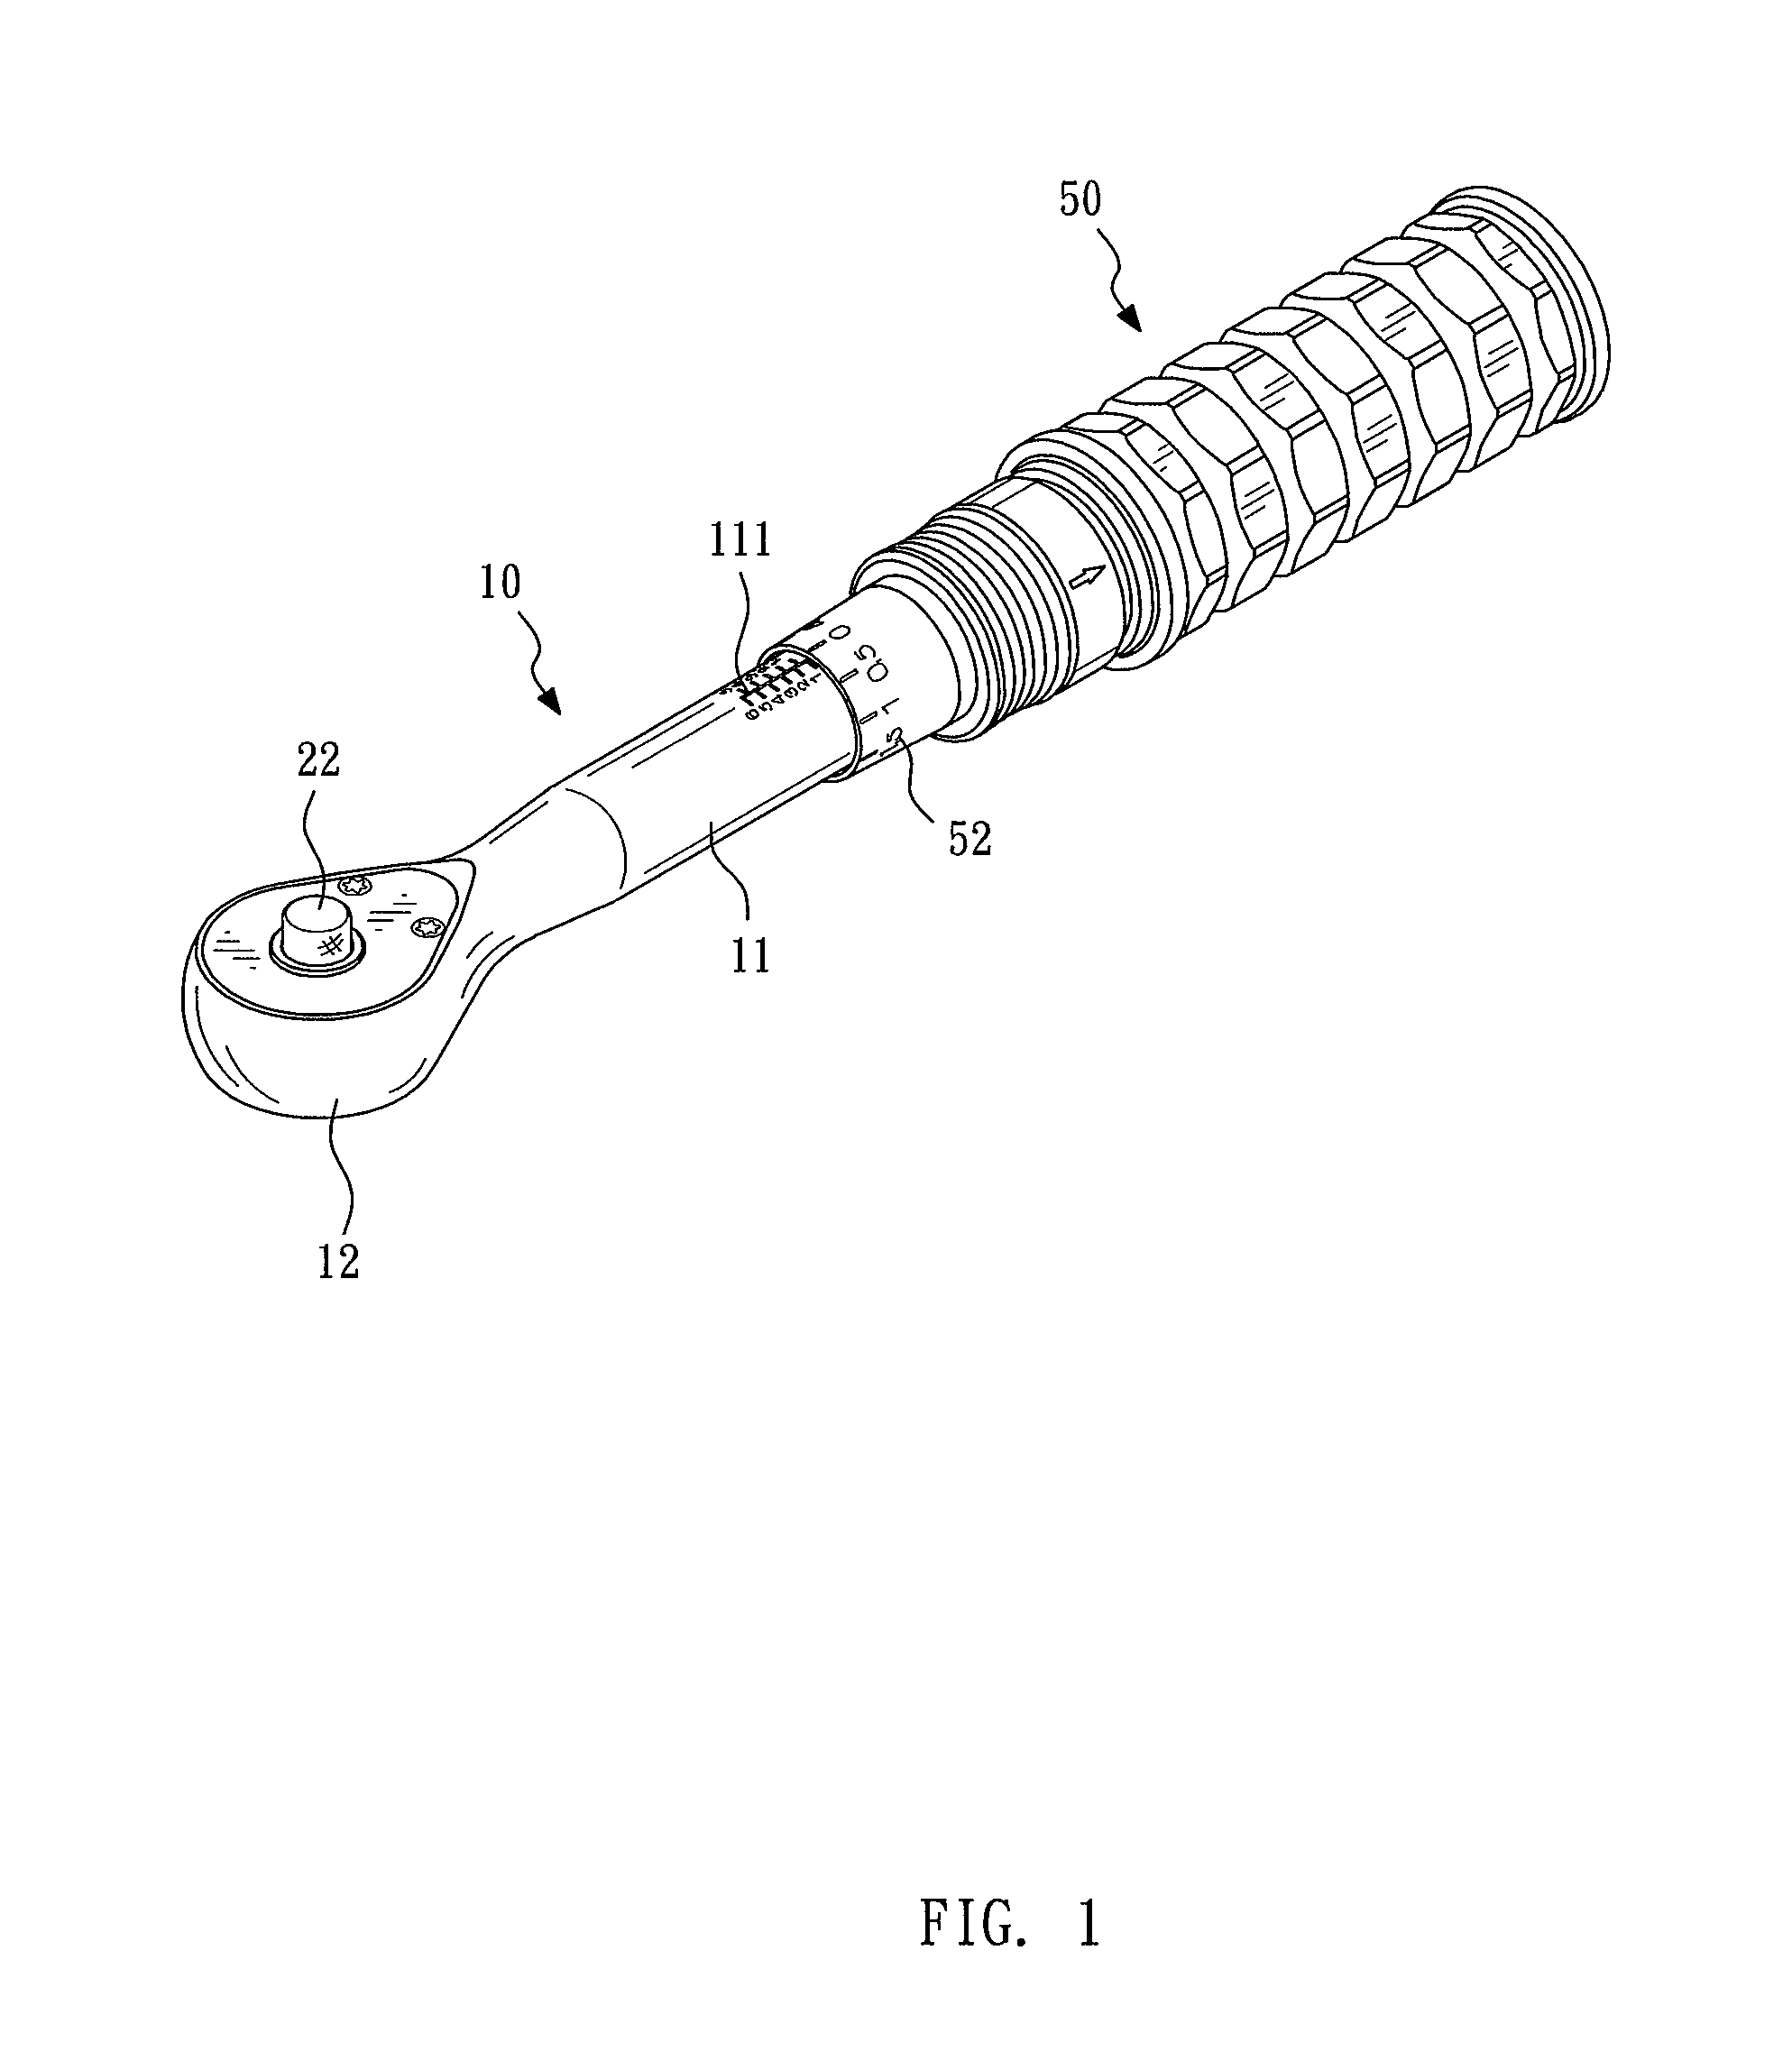 Torque wrench with constant torque